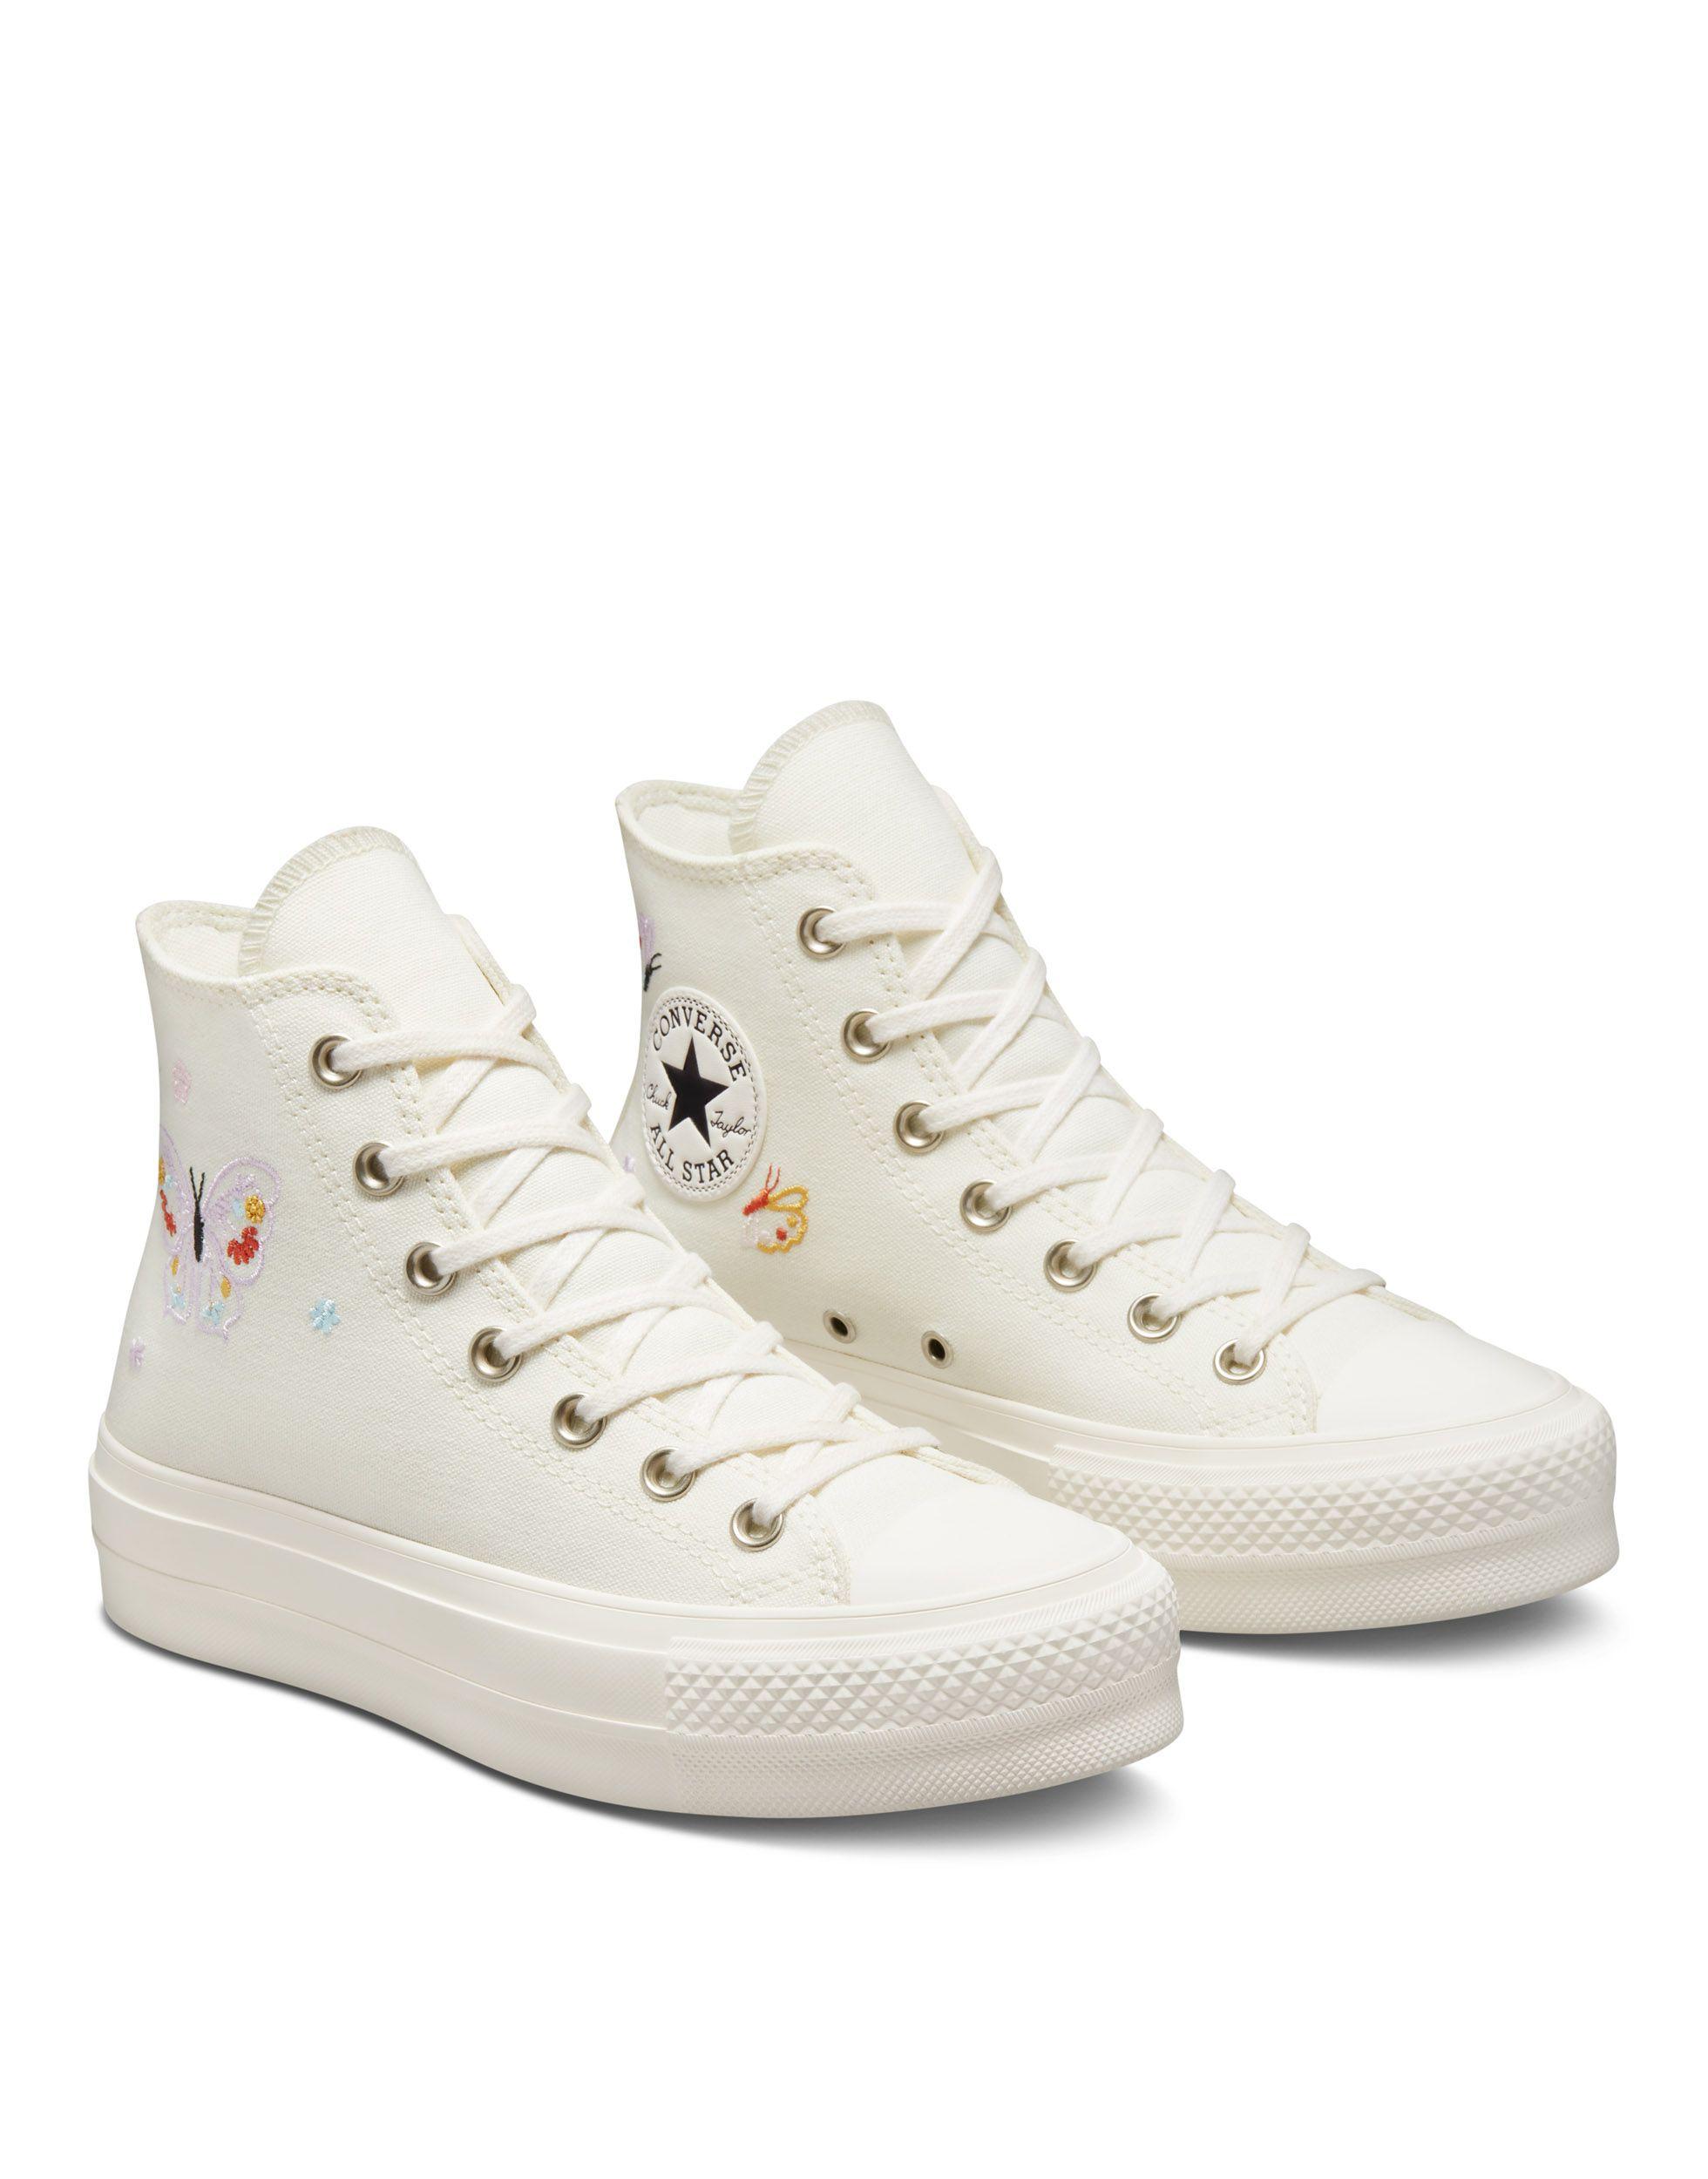 Converse Chuck Taylor All Star Lift Embroidered Platform Sneakers in White  | Lyst